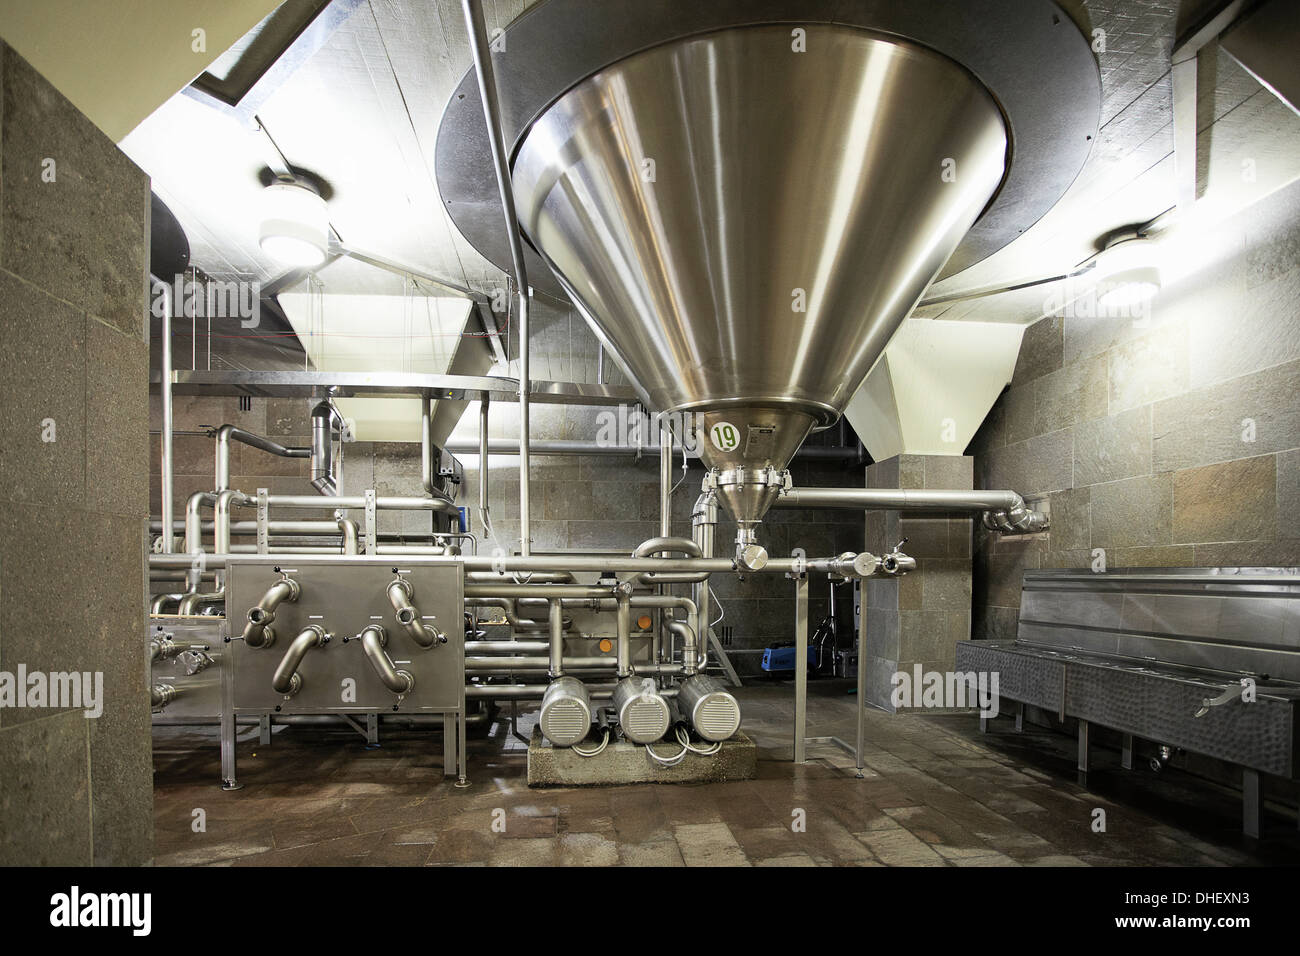 Machinery in a brewery Stock Photo